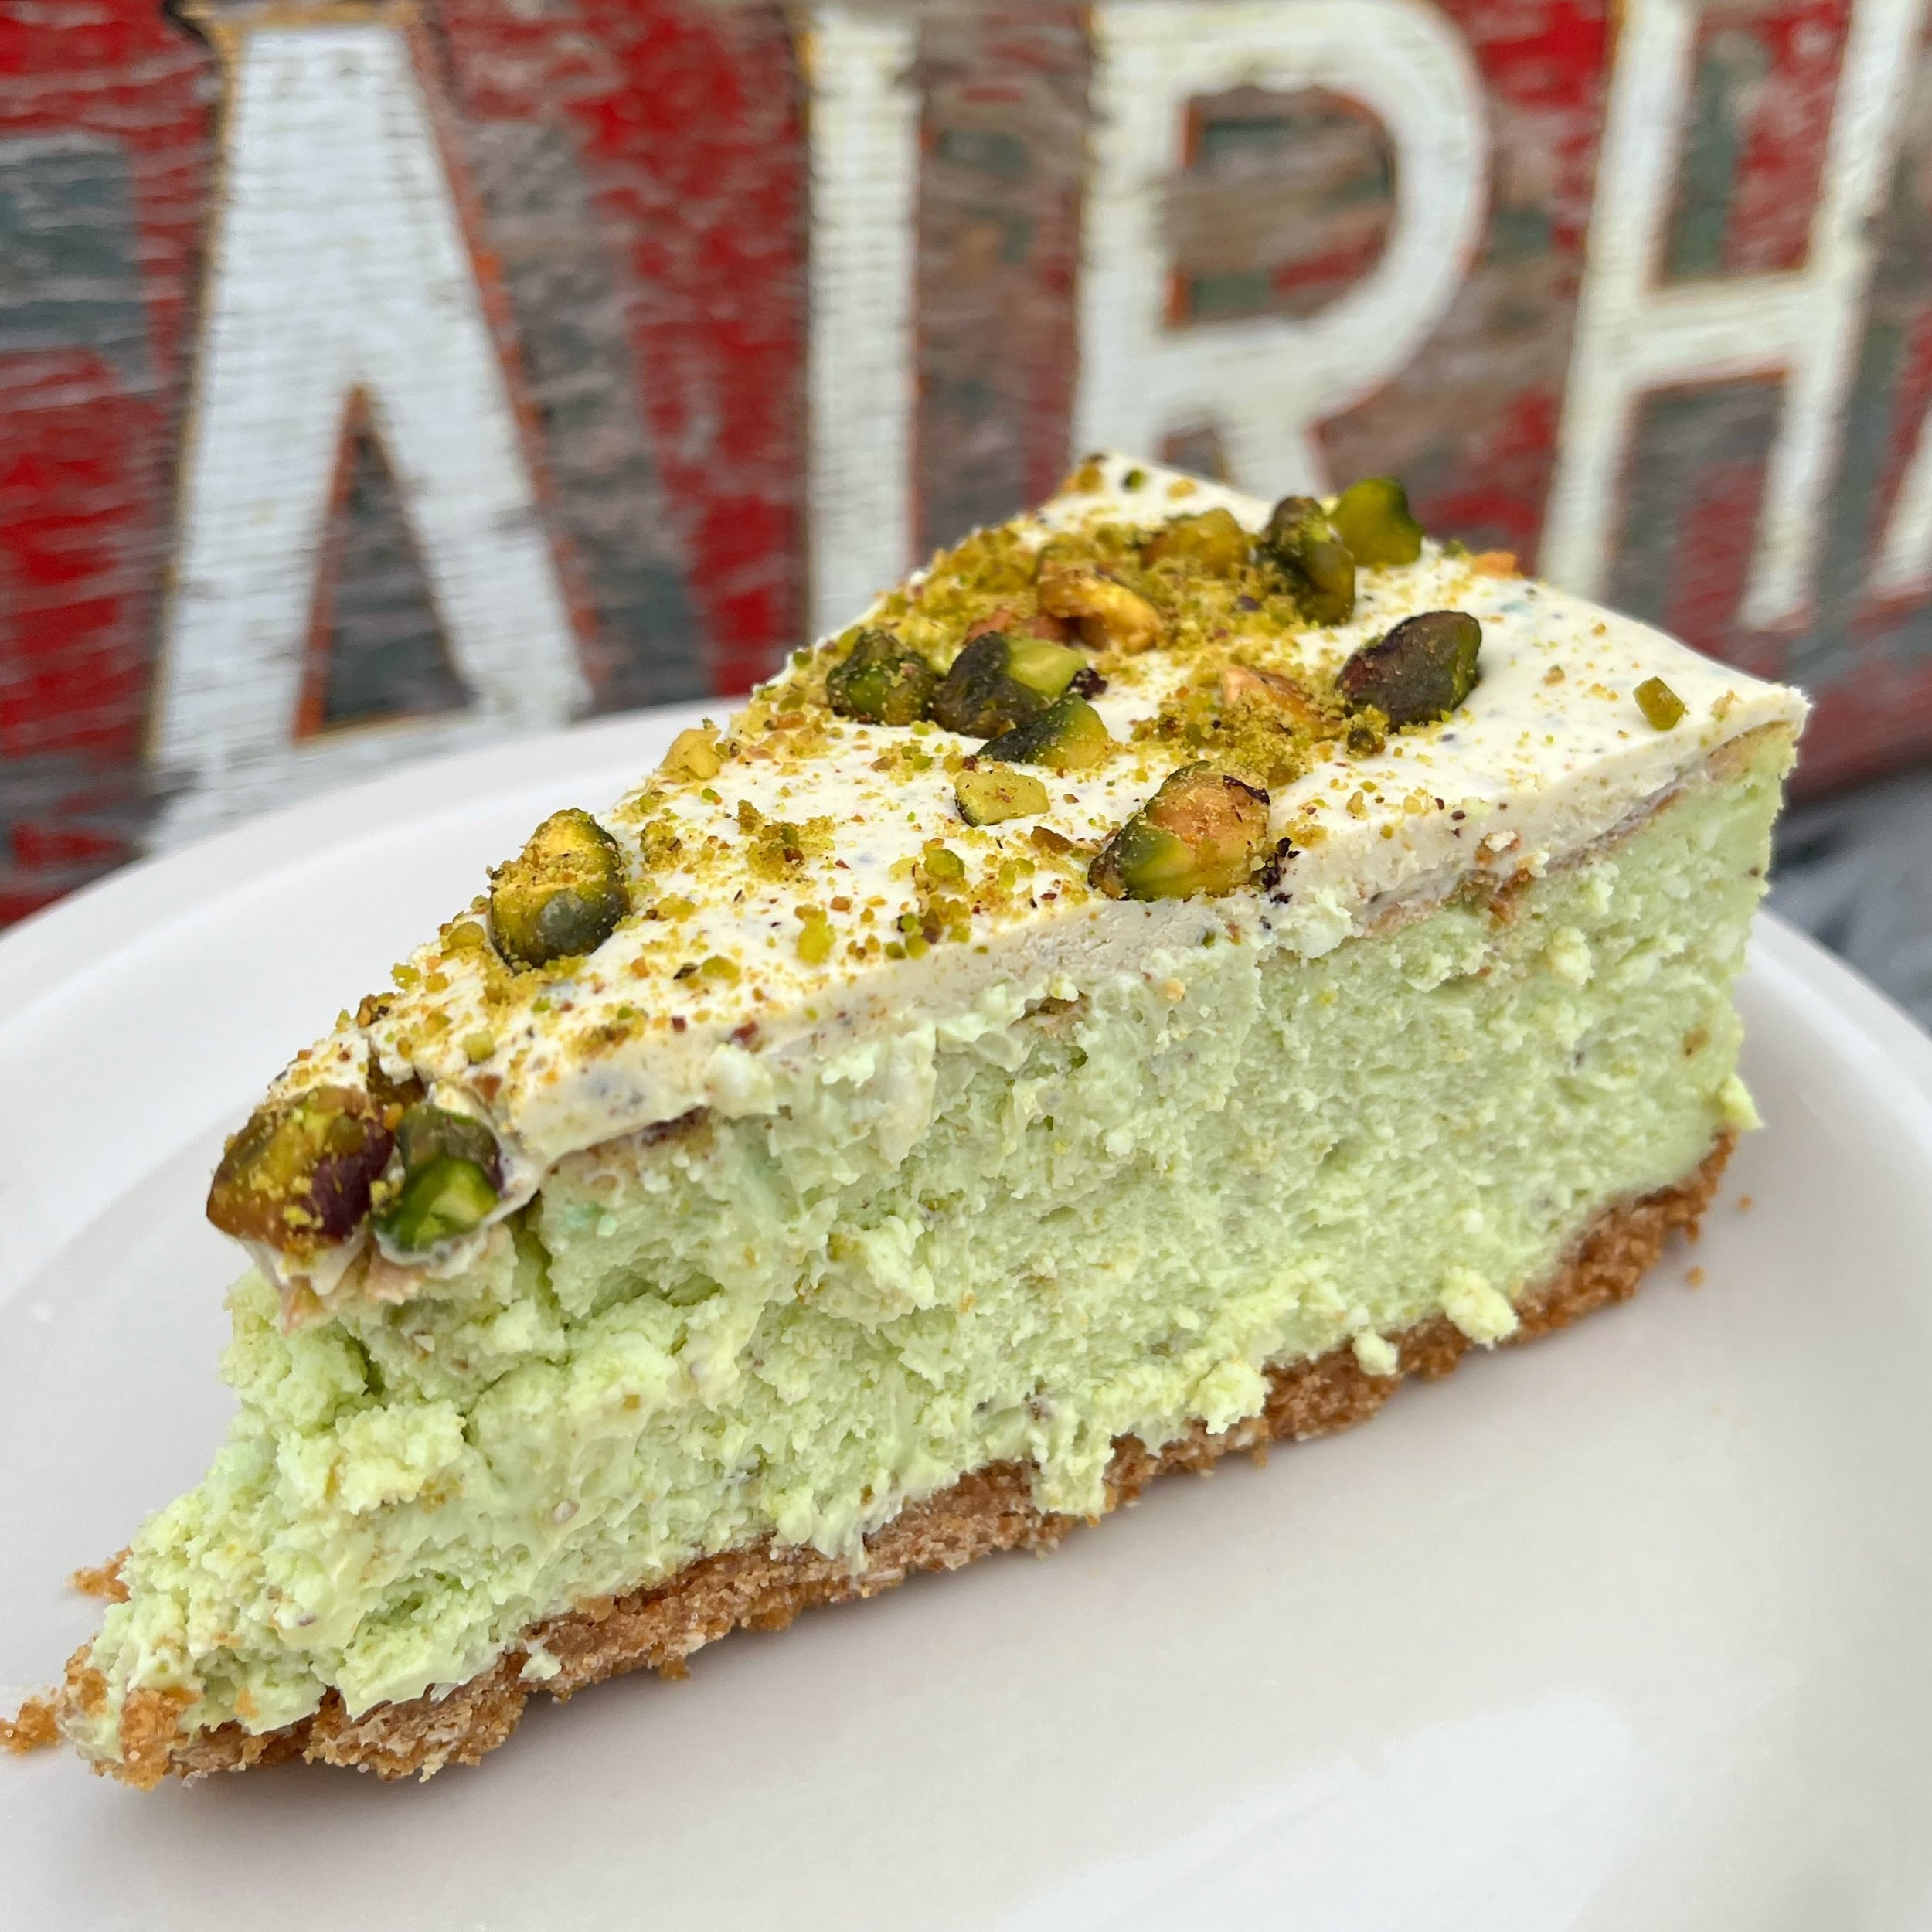 Save room for a slice of Pistachio White Chocolate Cheesecake. Baked in house and on special for the week here at Train Wreck!